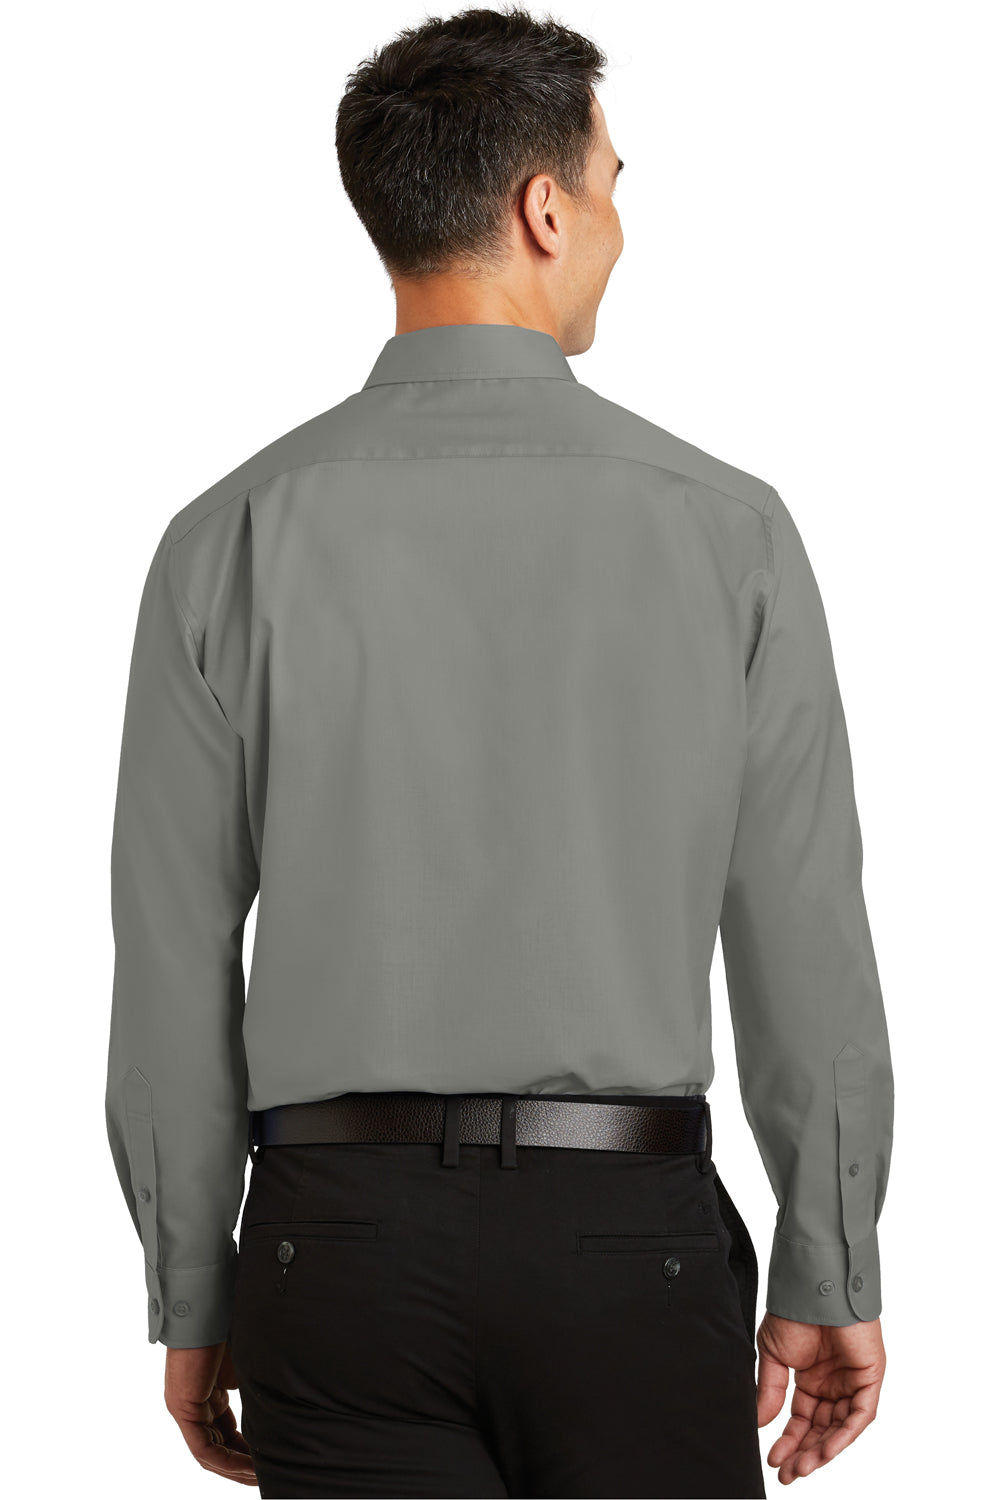 Port Authority S663 Mens SuperPro Wrinkle Resistant Long Sleeve Button Down Shirt w/ Pocket Monument Grey Back